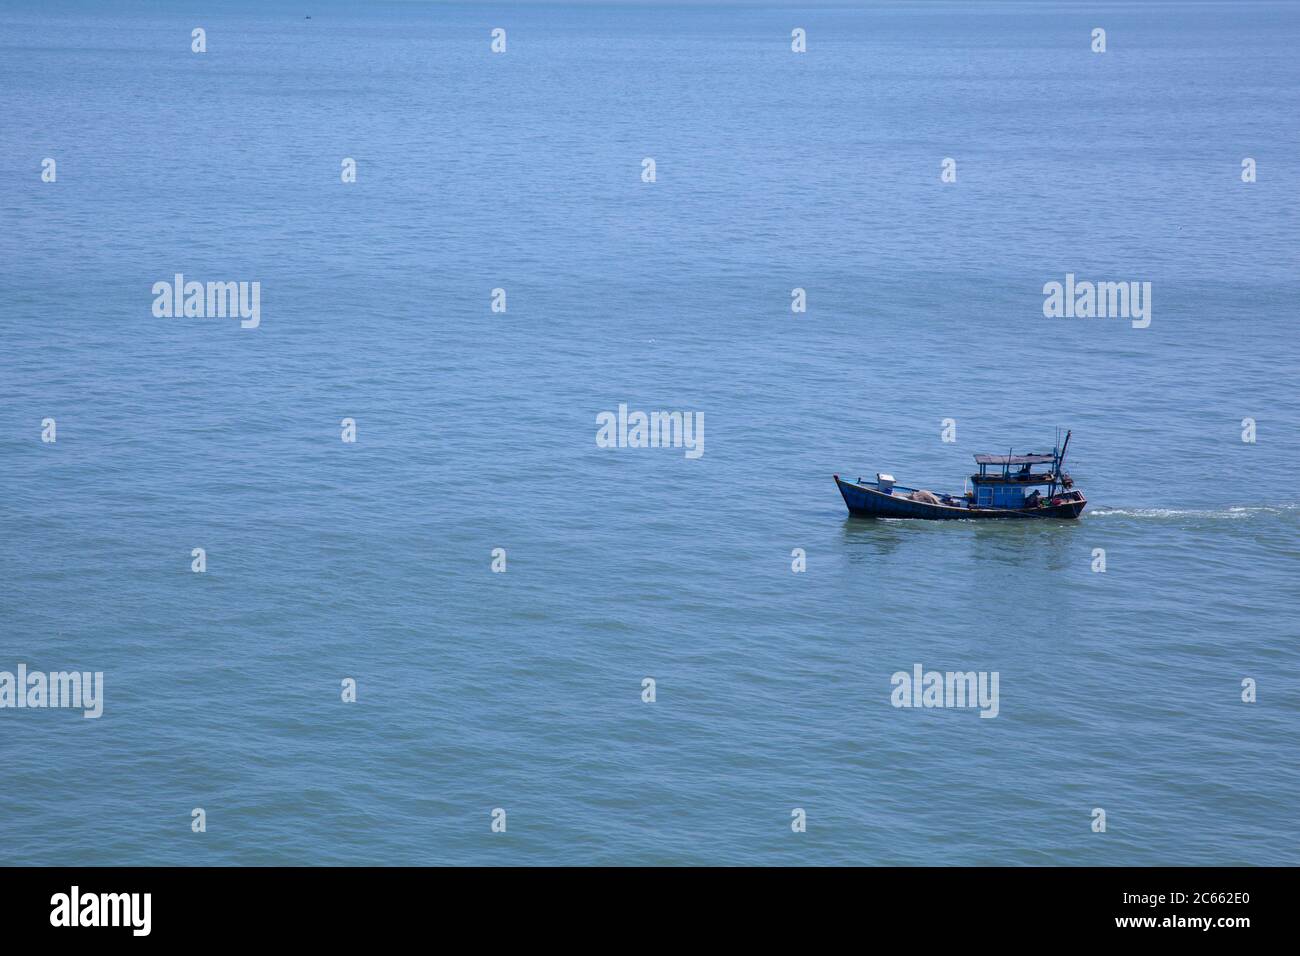 Solitary blue fishing boat on a vast calm sea with no other subject in the scene on the South China Sea near Vietnam. Stock Photo